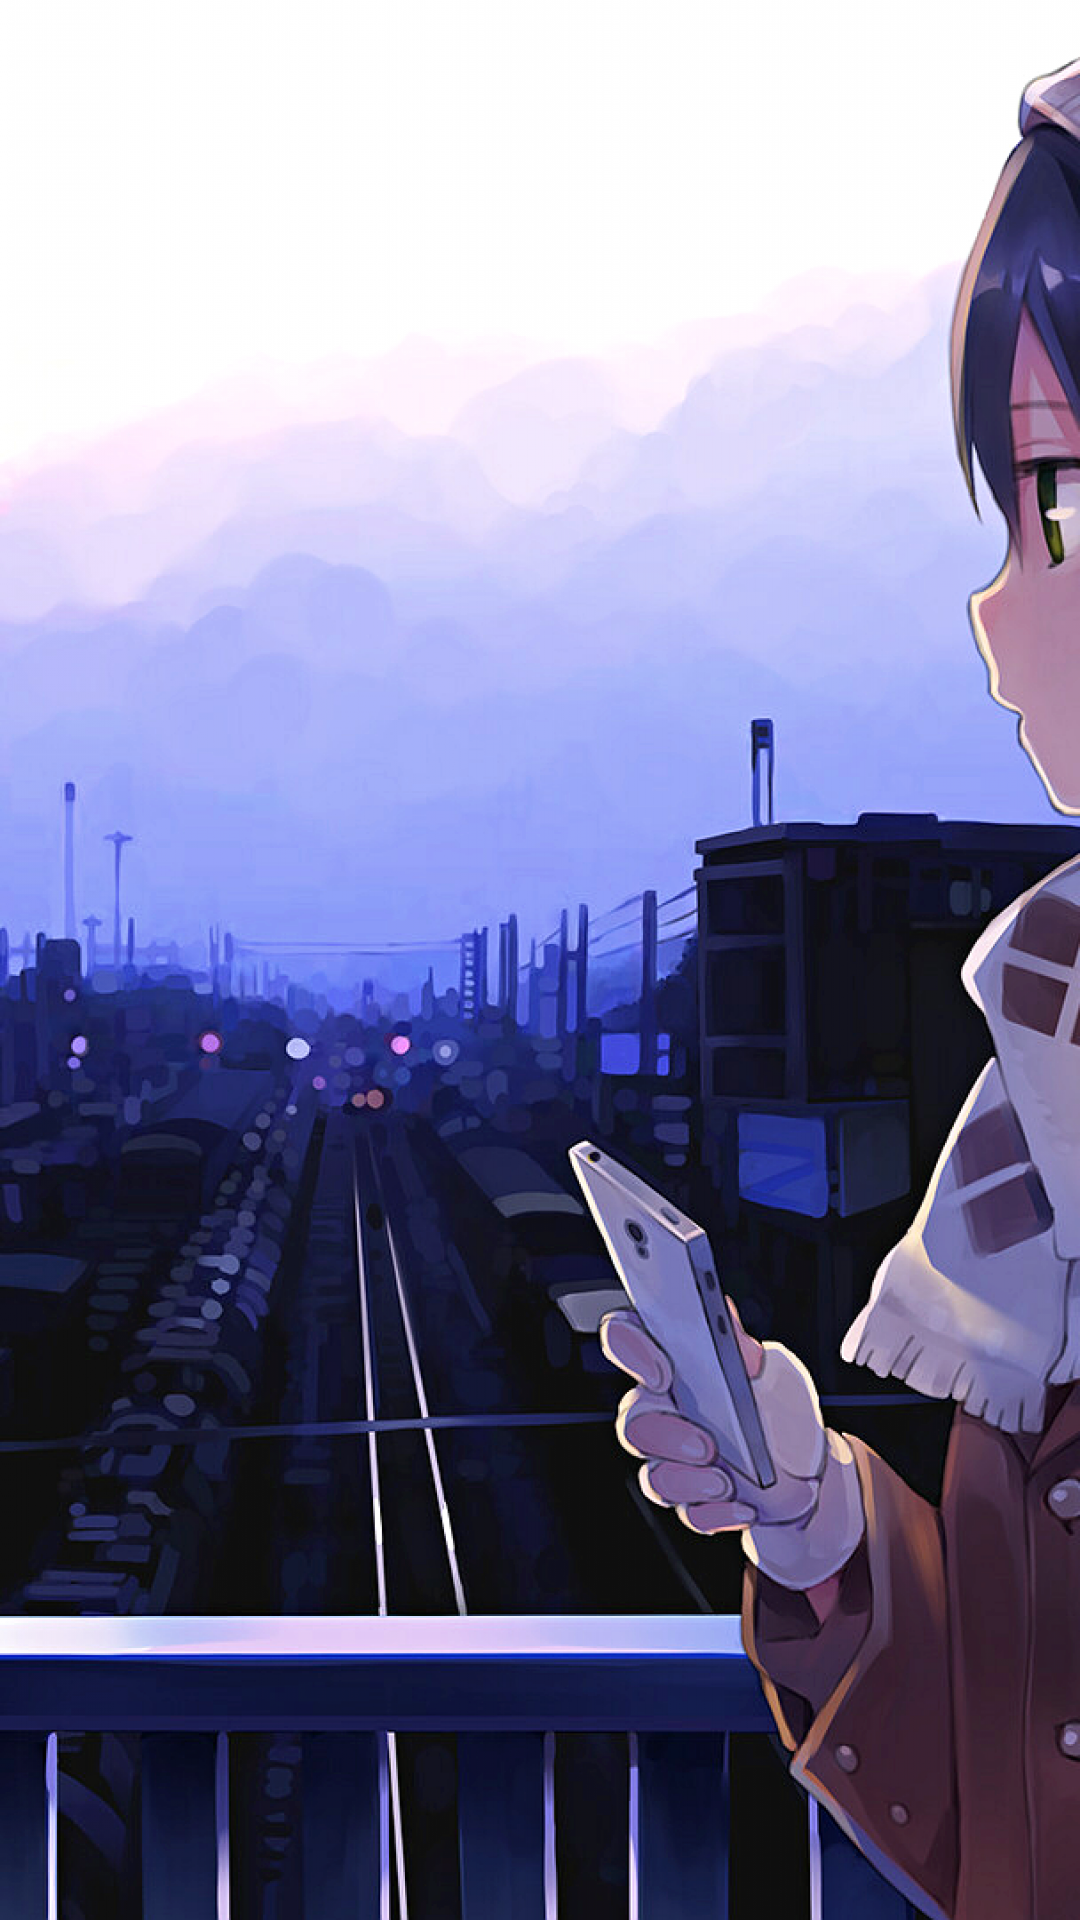 Anime Girl, Train Station, Winter, Scarf, Profile View - Anime View  Wallpaper Iphone - 1080x1920 Wallpaper 